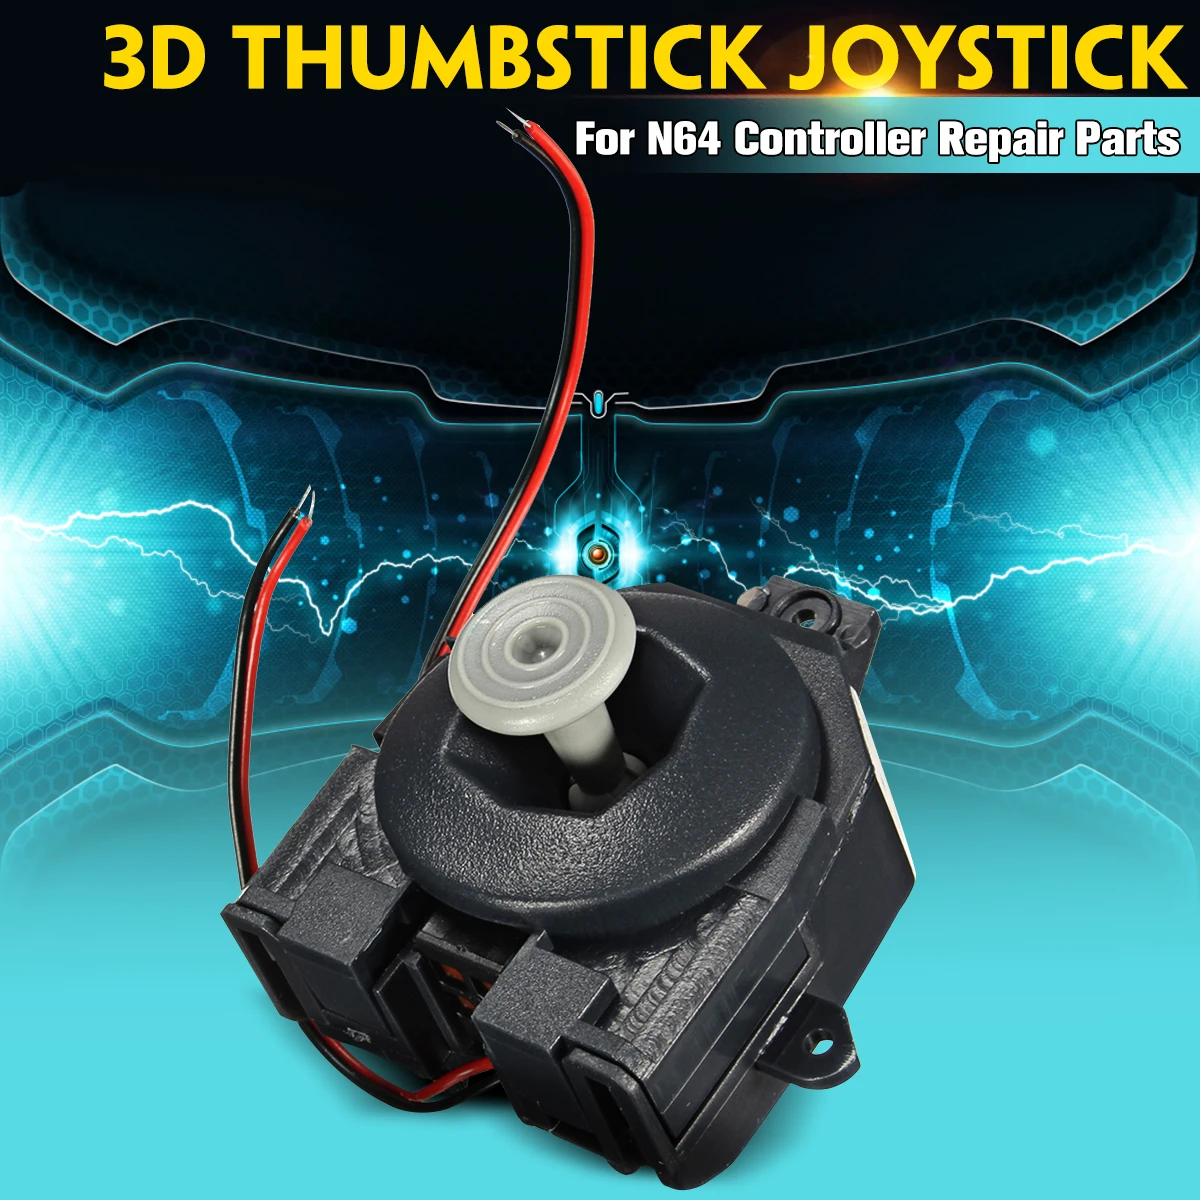 

For Nintendo-For N64 Wired Replacement 3D Thumbstick Analog Stick Joystick Controller Thumbstick Pad Repair Parts